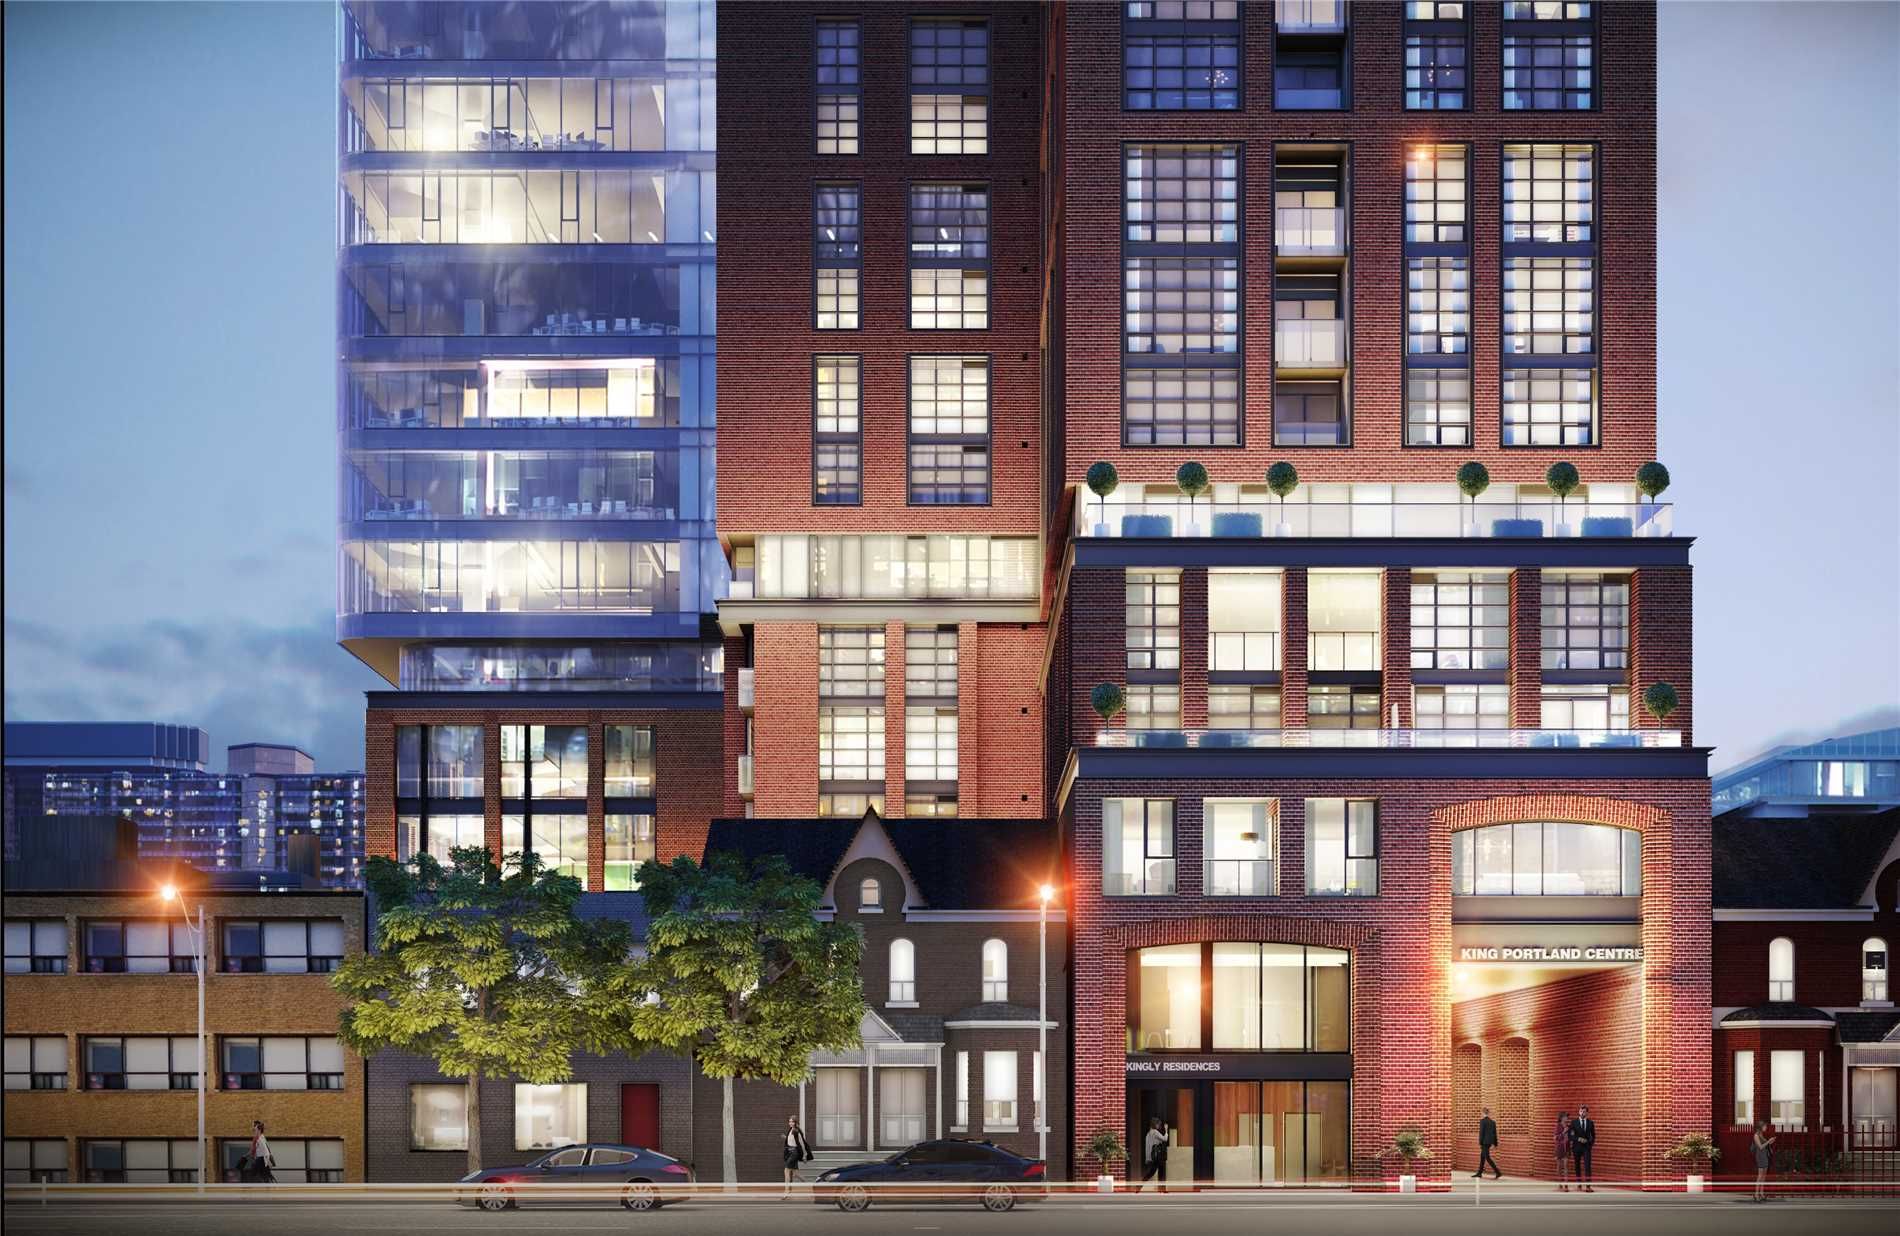 Concept art for Kingly Residences and King Portland Centre showing red-brick building, blue glass and streets.